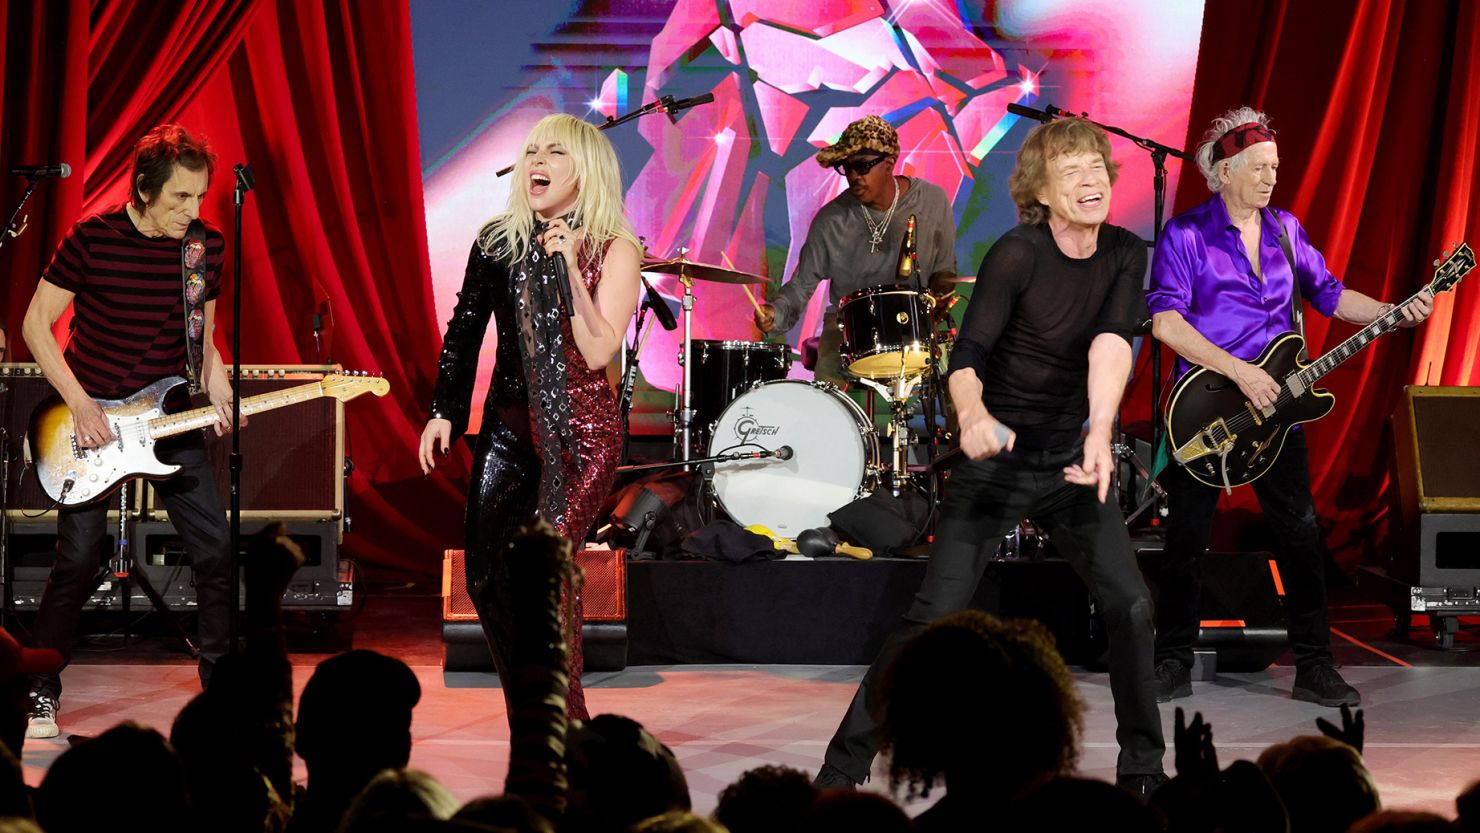 Ronnie Wood, Lady Gaga, Mick Jagger, Steve Jordan and Keith Richards perform during The Rolling Stones surprise set in celebration of their new album "Hackney Diamonds" at Racket NYC on Thusday.